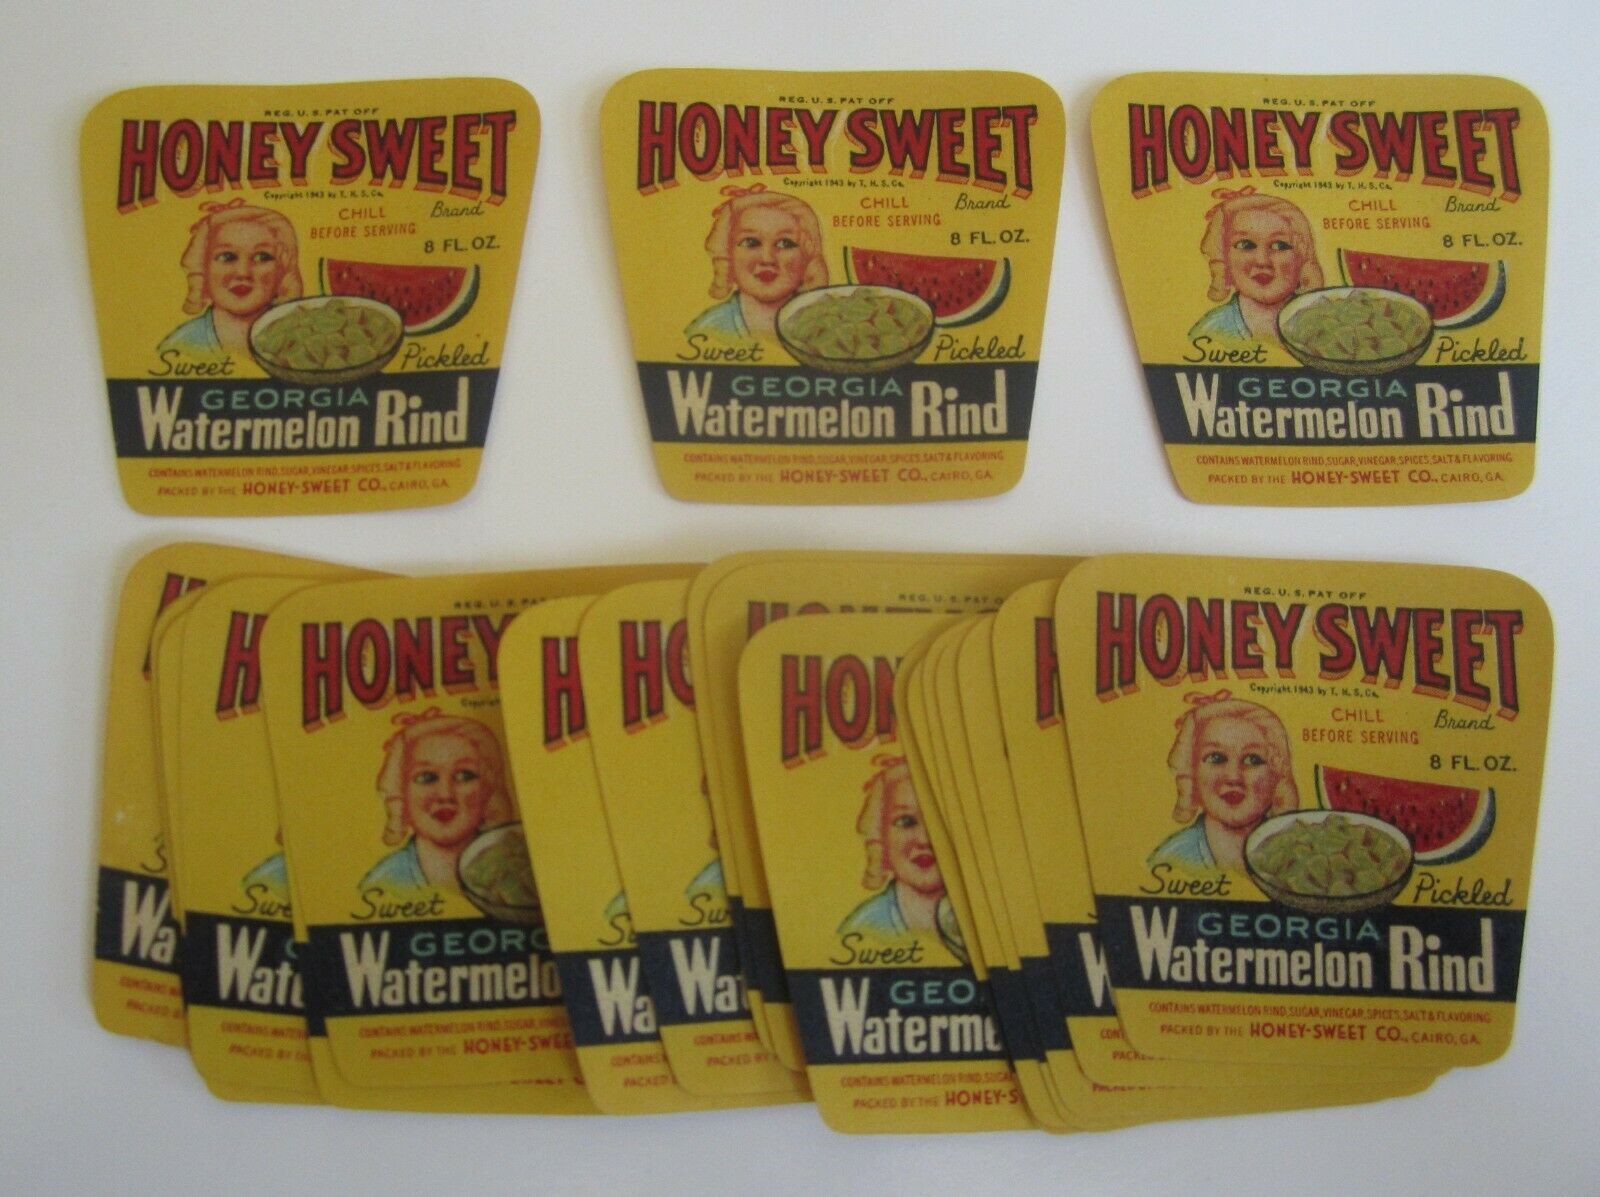  Lot of 25 Old 1943 Honey Sweet WATERMELON Rind...